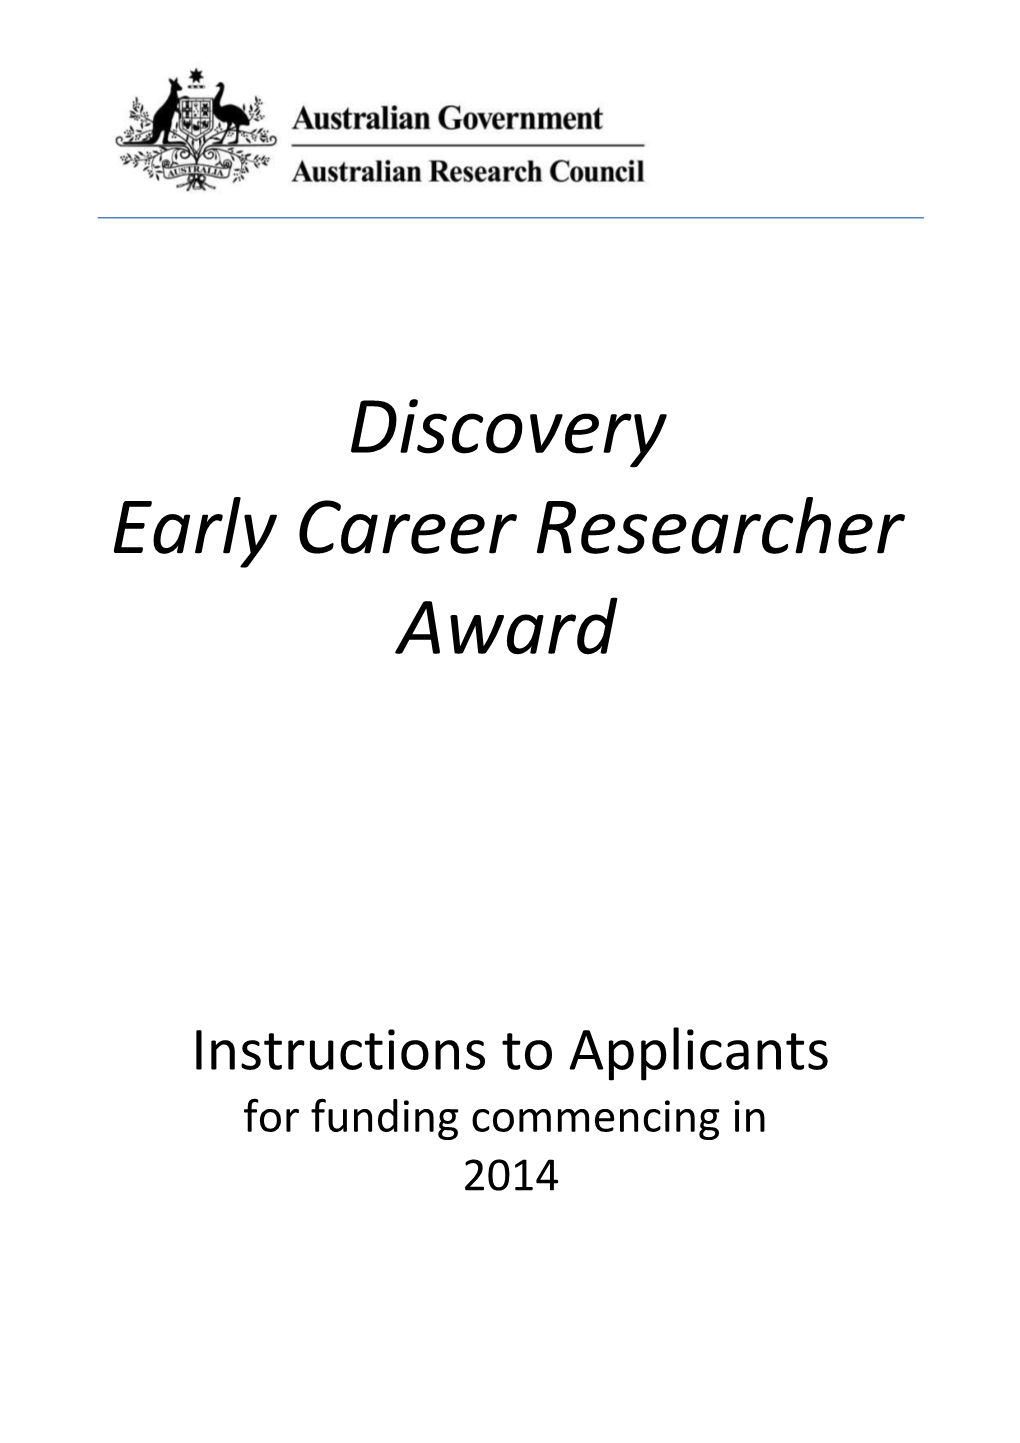 Discovery Early Career Researcher Award for Funding Commencing in 2014 - Instructions